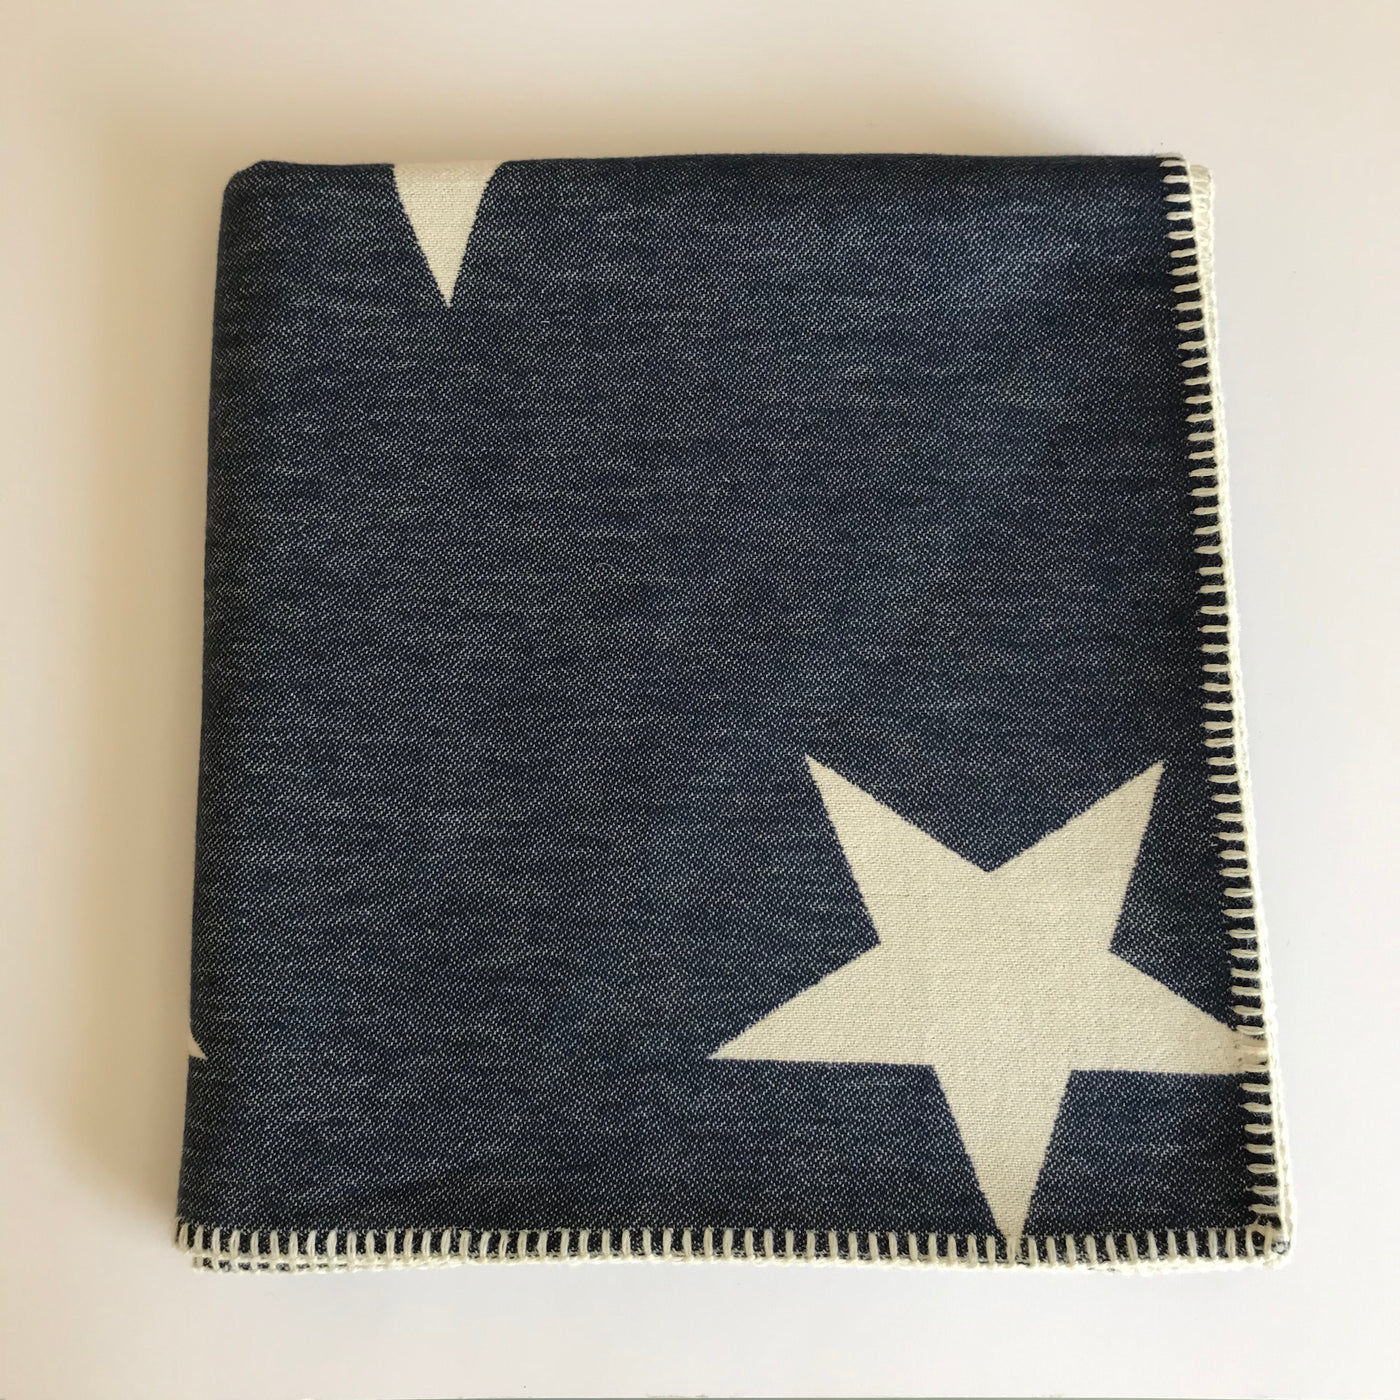 Rory & Ruby reversible star design throw in navy and ivory with traditional blanket stitch edging.